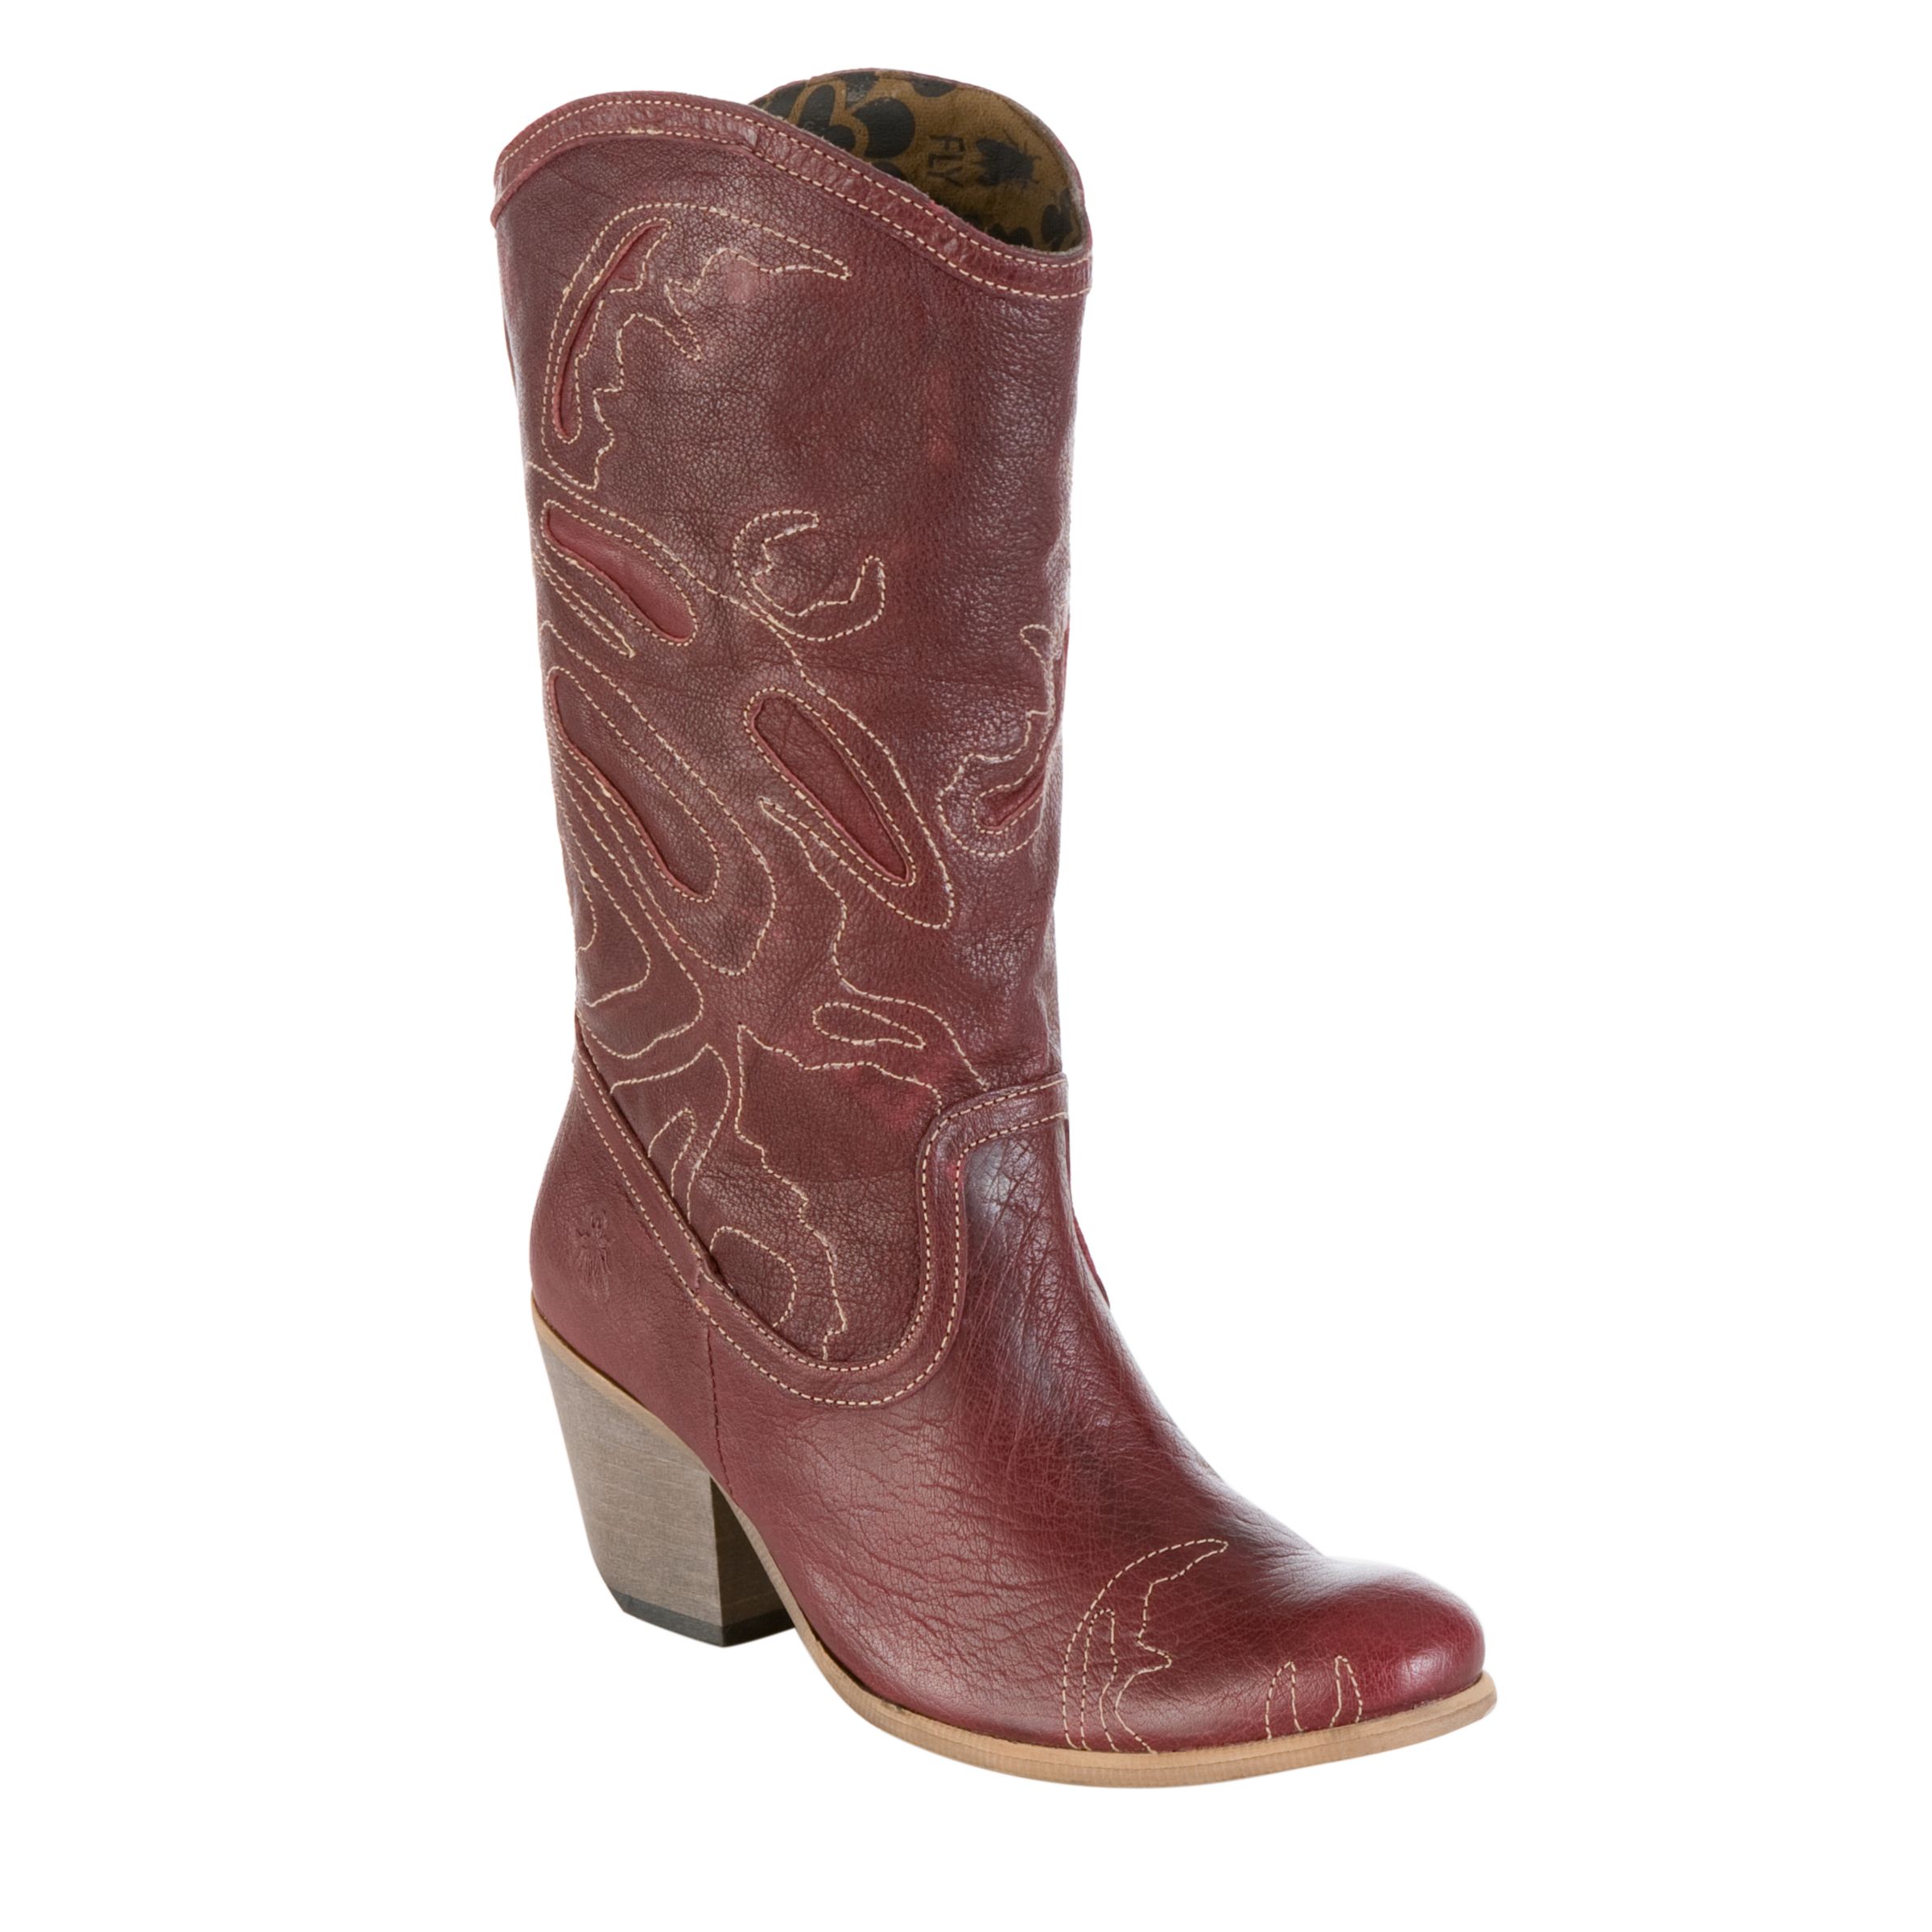 Fly London Lonne Cowboy Boots, Wine at John Lewis